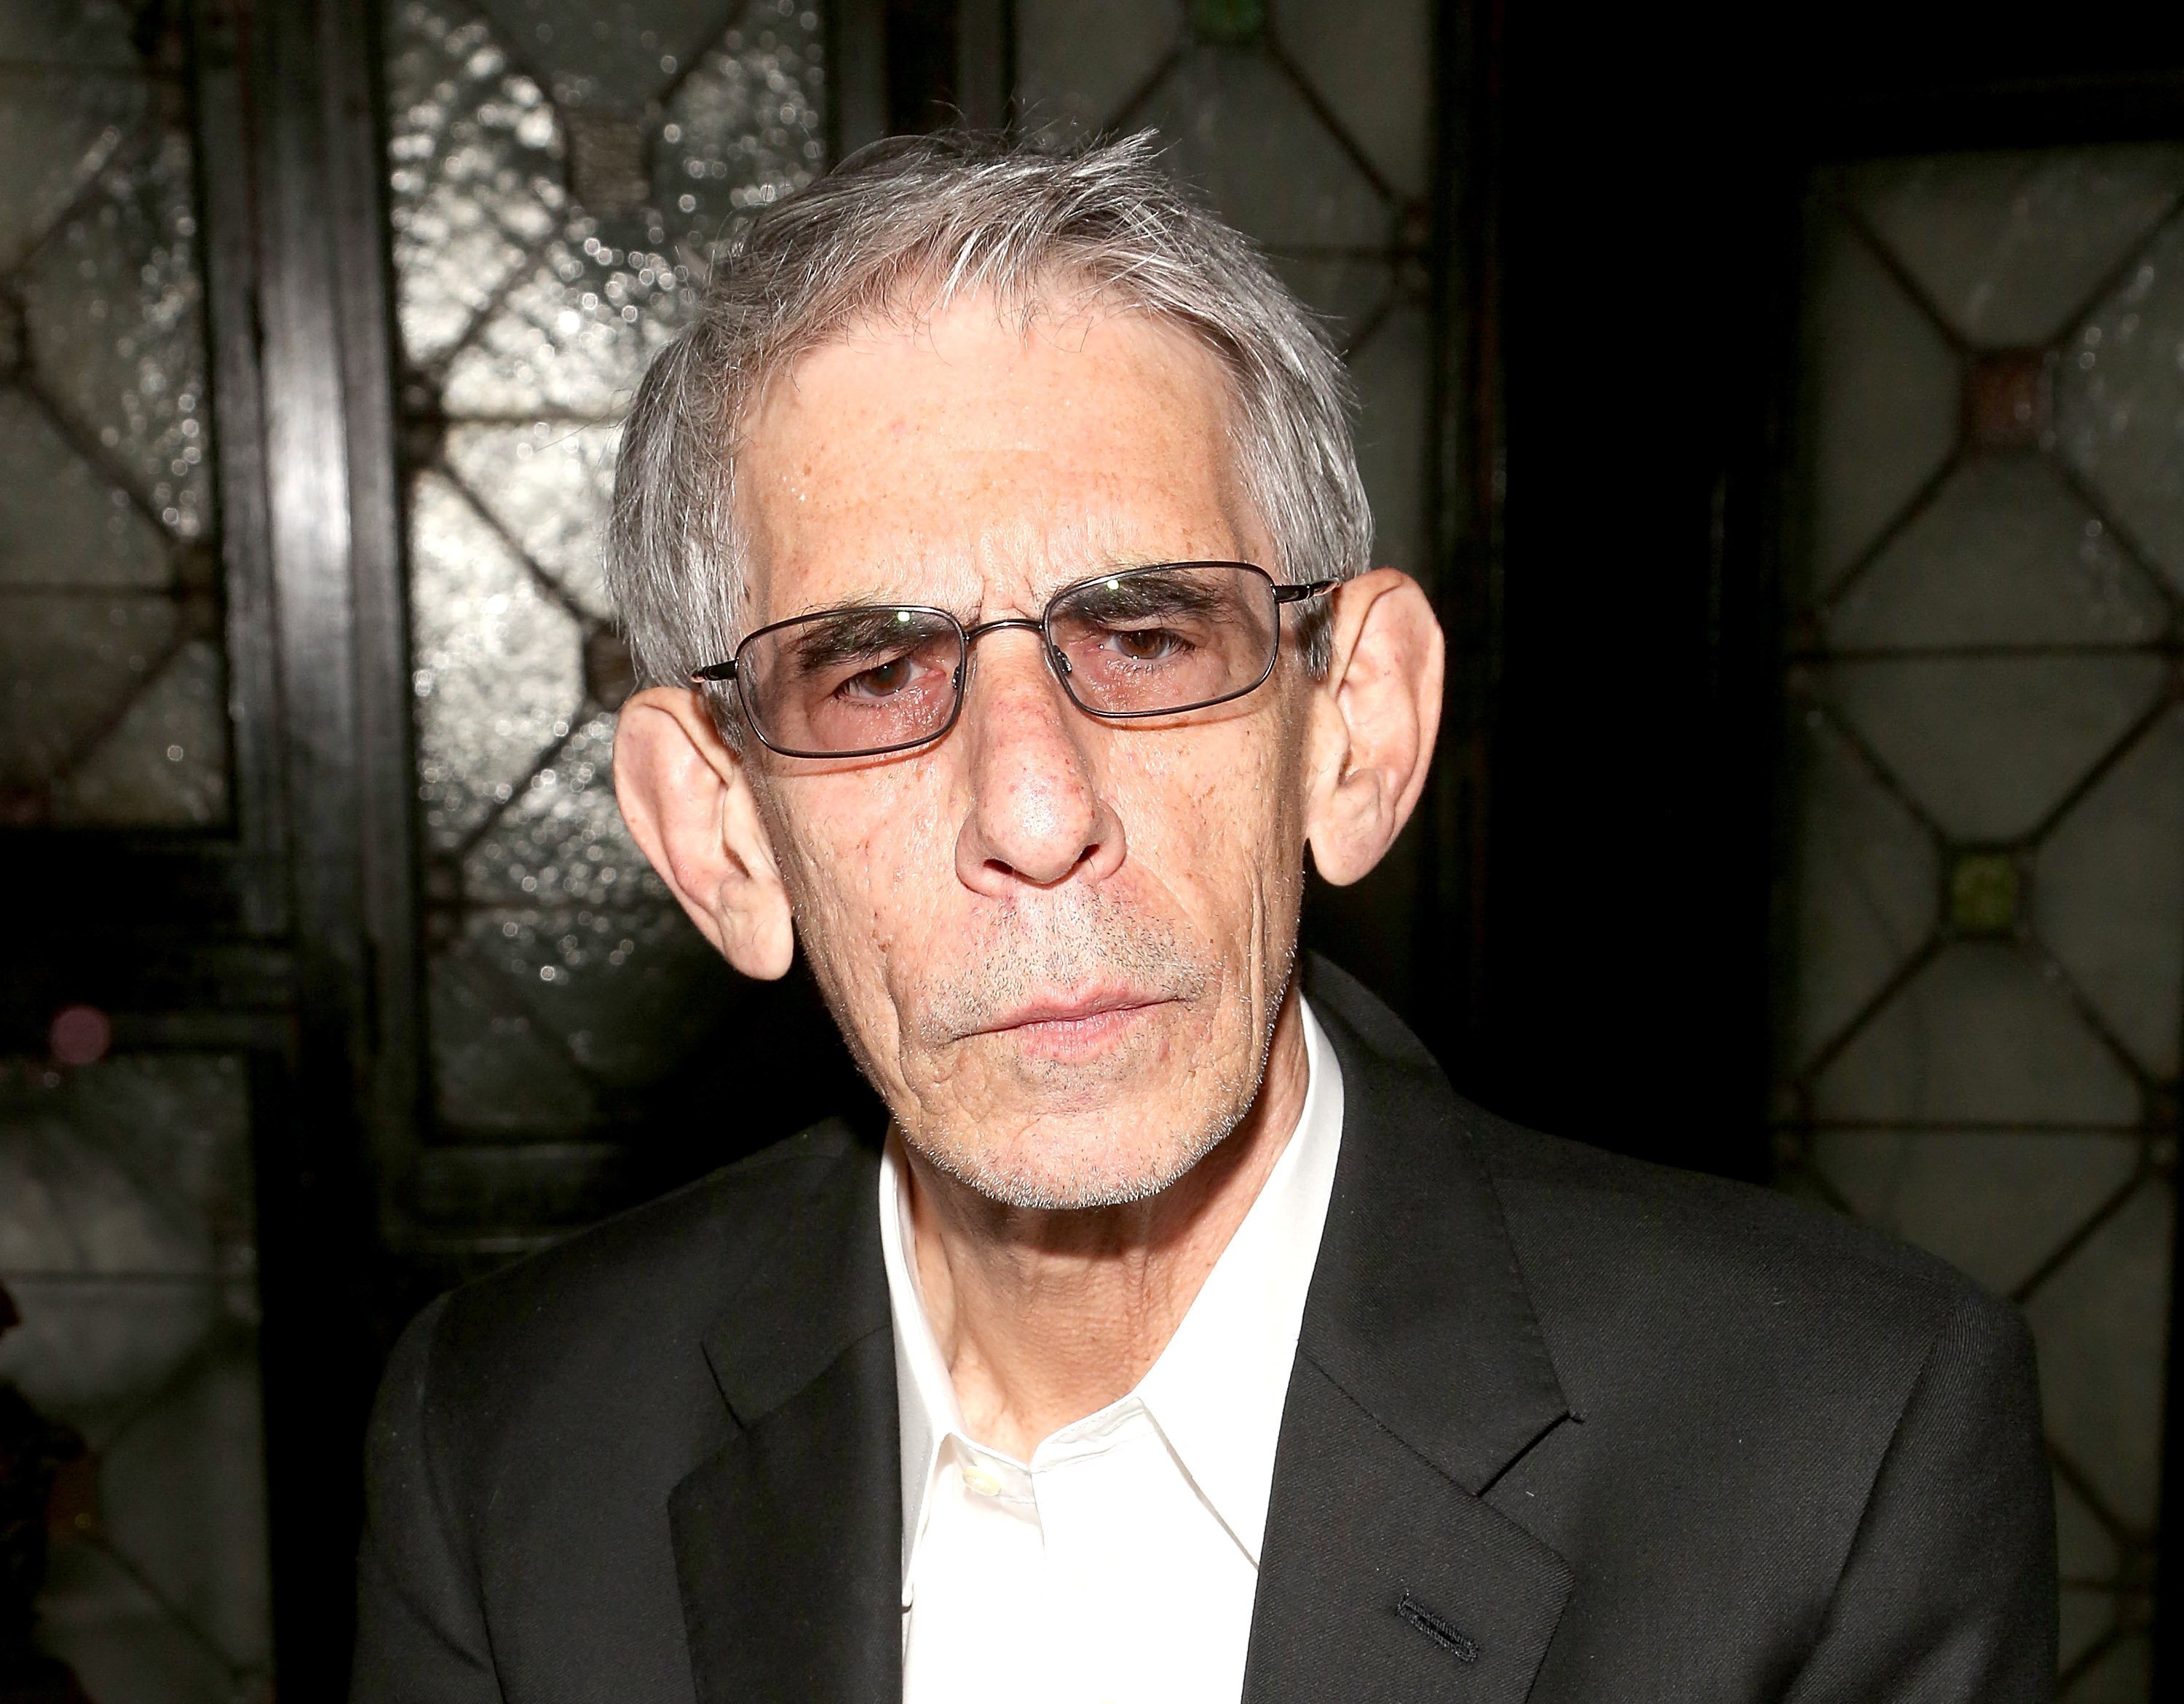 Richard Belzer attends the Friars Club celebration of Jerry Lewis and the 50th anniversary "The Nutty Professor" at New York Friars Club on June 5, 2014, in New York City. | Source: Getty Images.